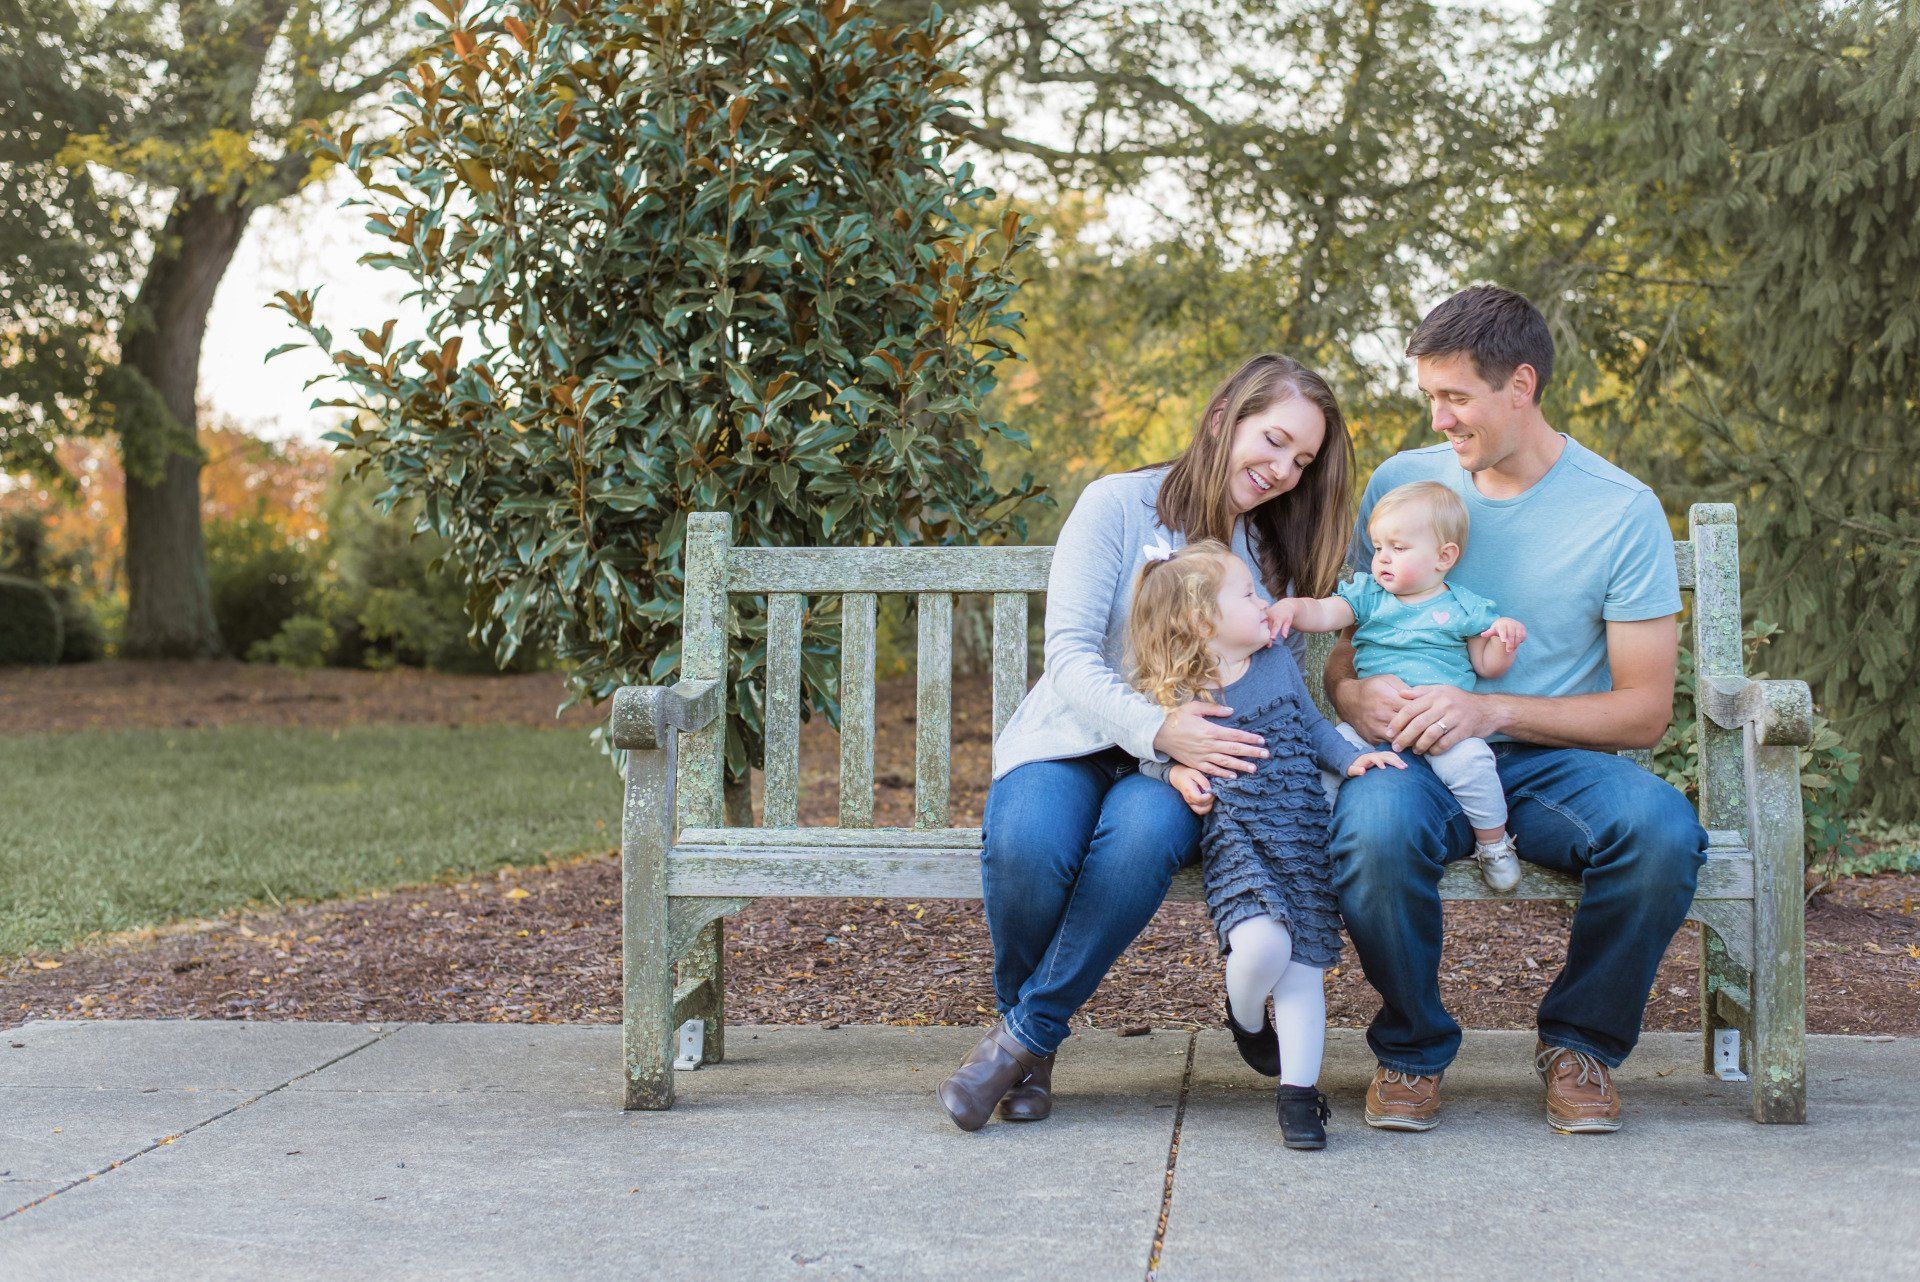 Dr. Annie Enzweiler and her family on park bench image